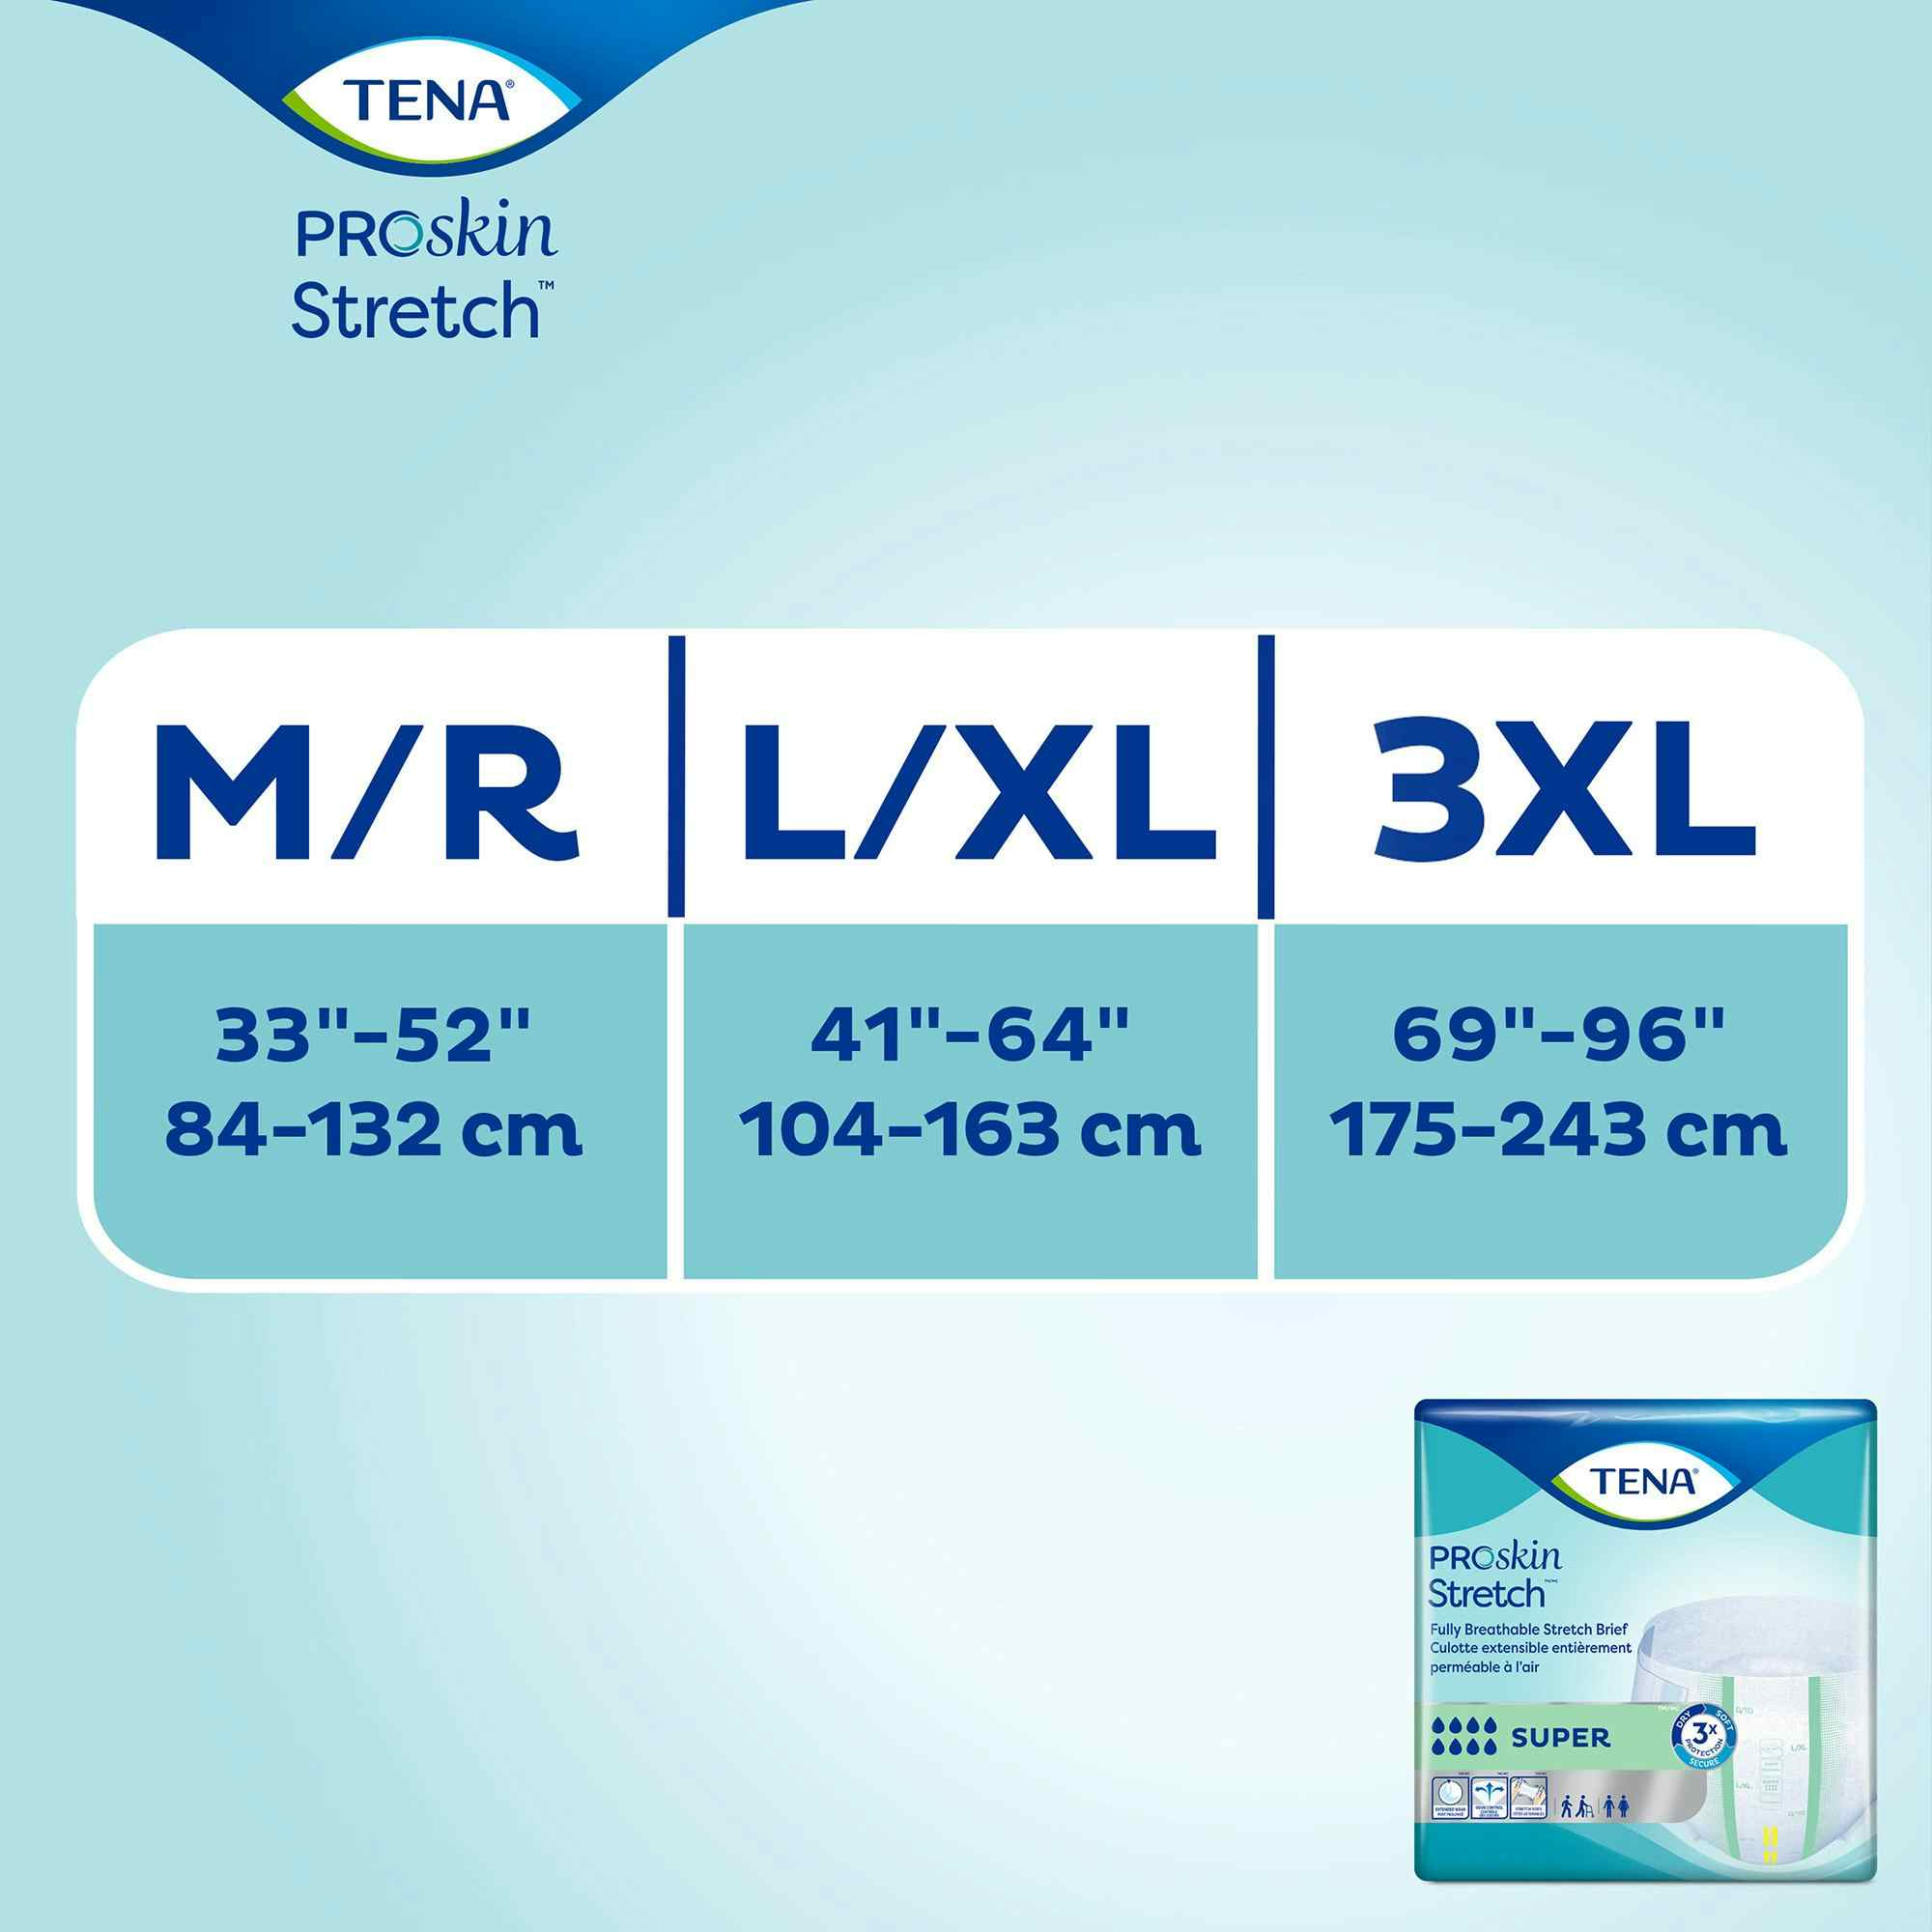 TENA Stretch Super Incontinence Adult Diaper, Super Absorbency, 67902, Medium, Pack of 28